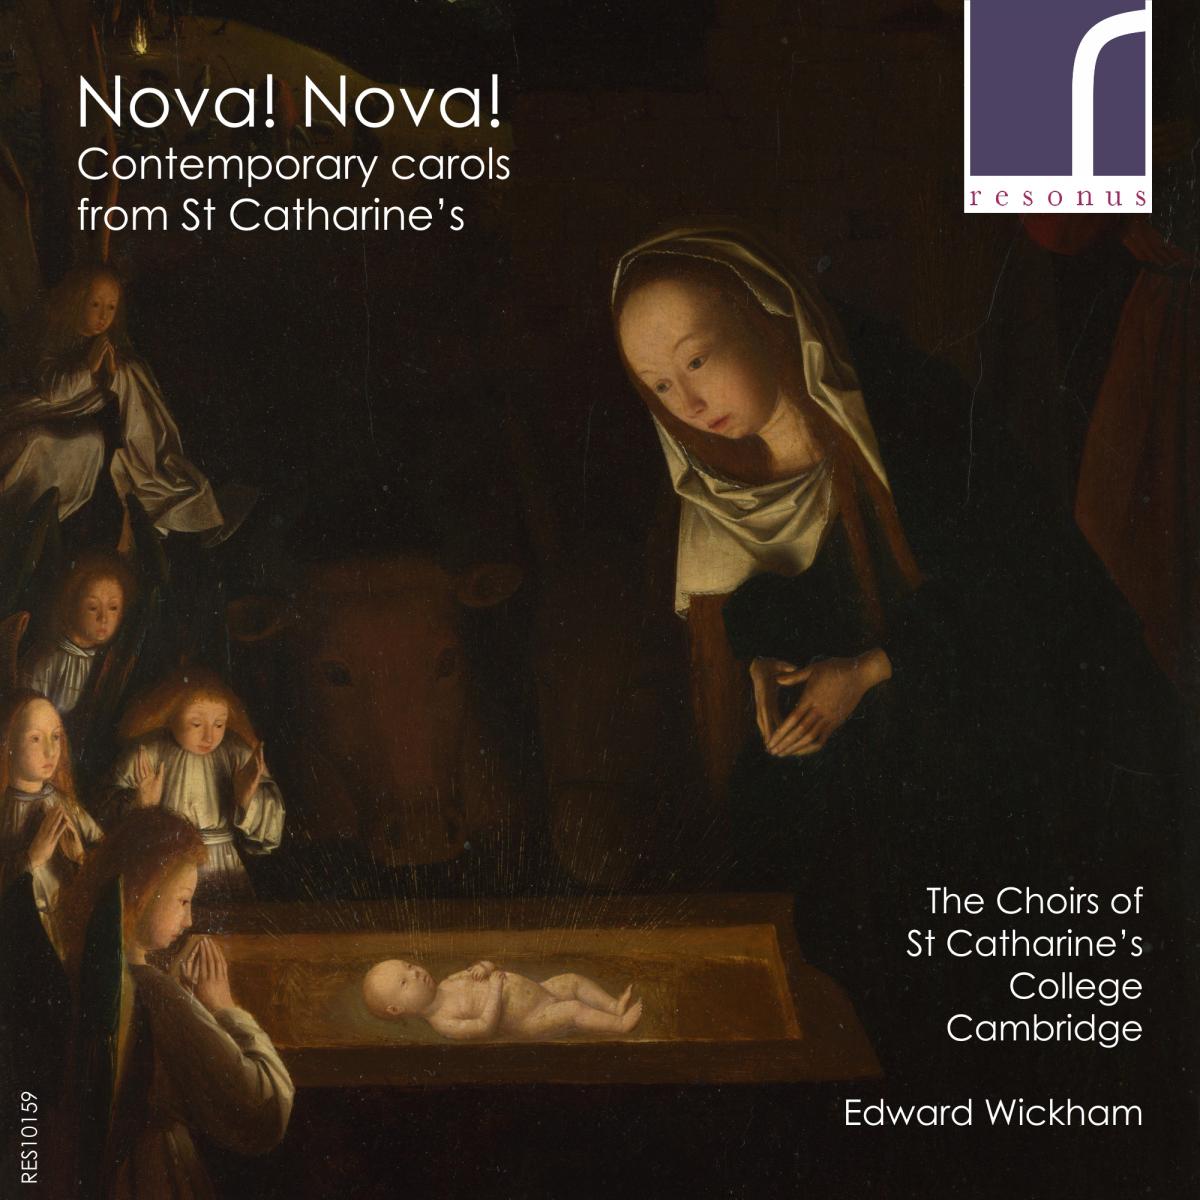 St Catharine's choirs and musicians